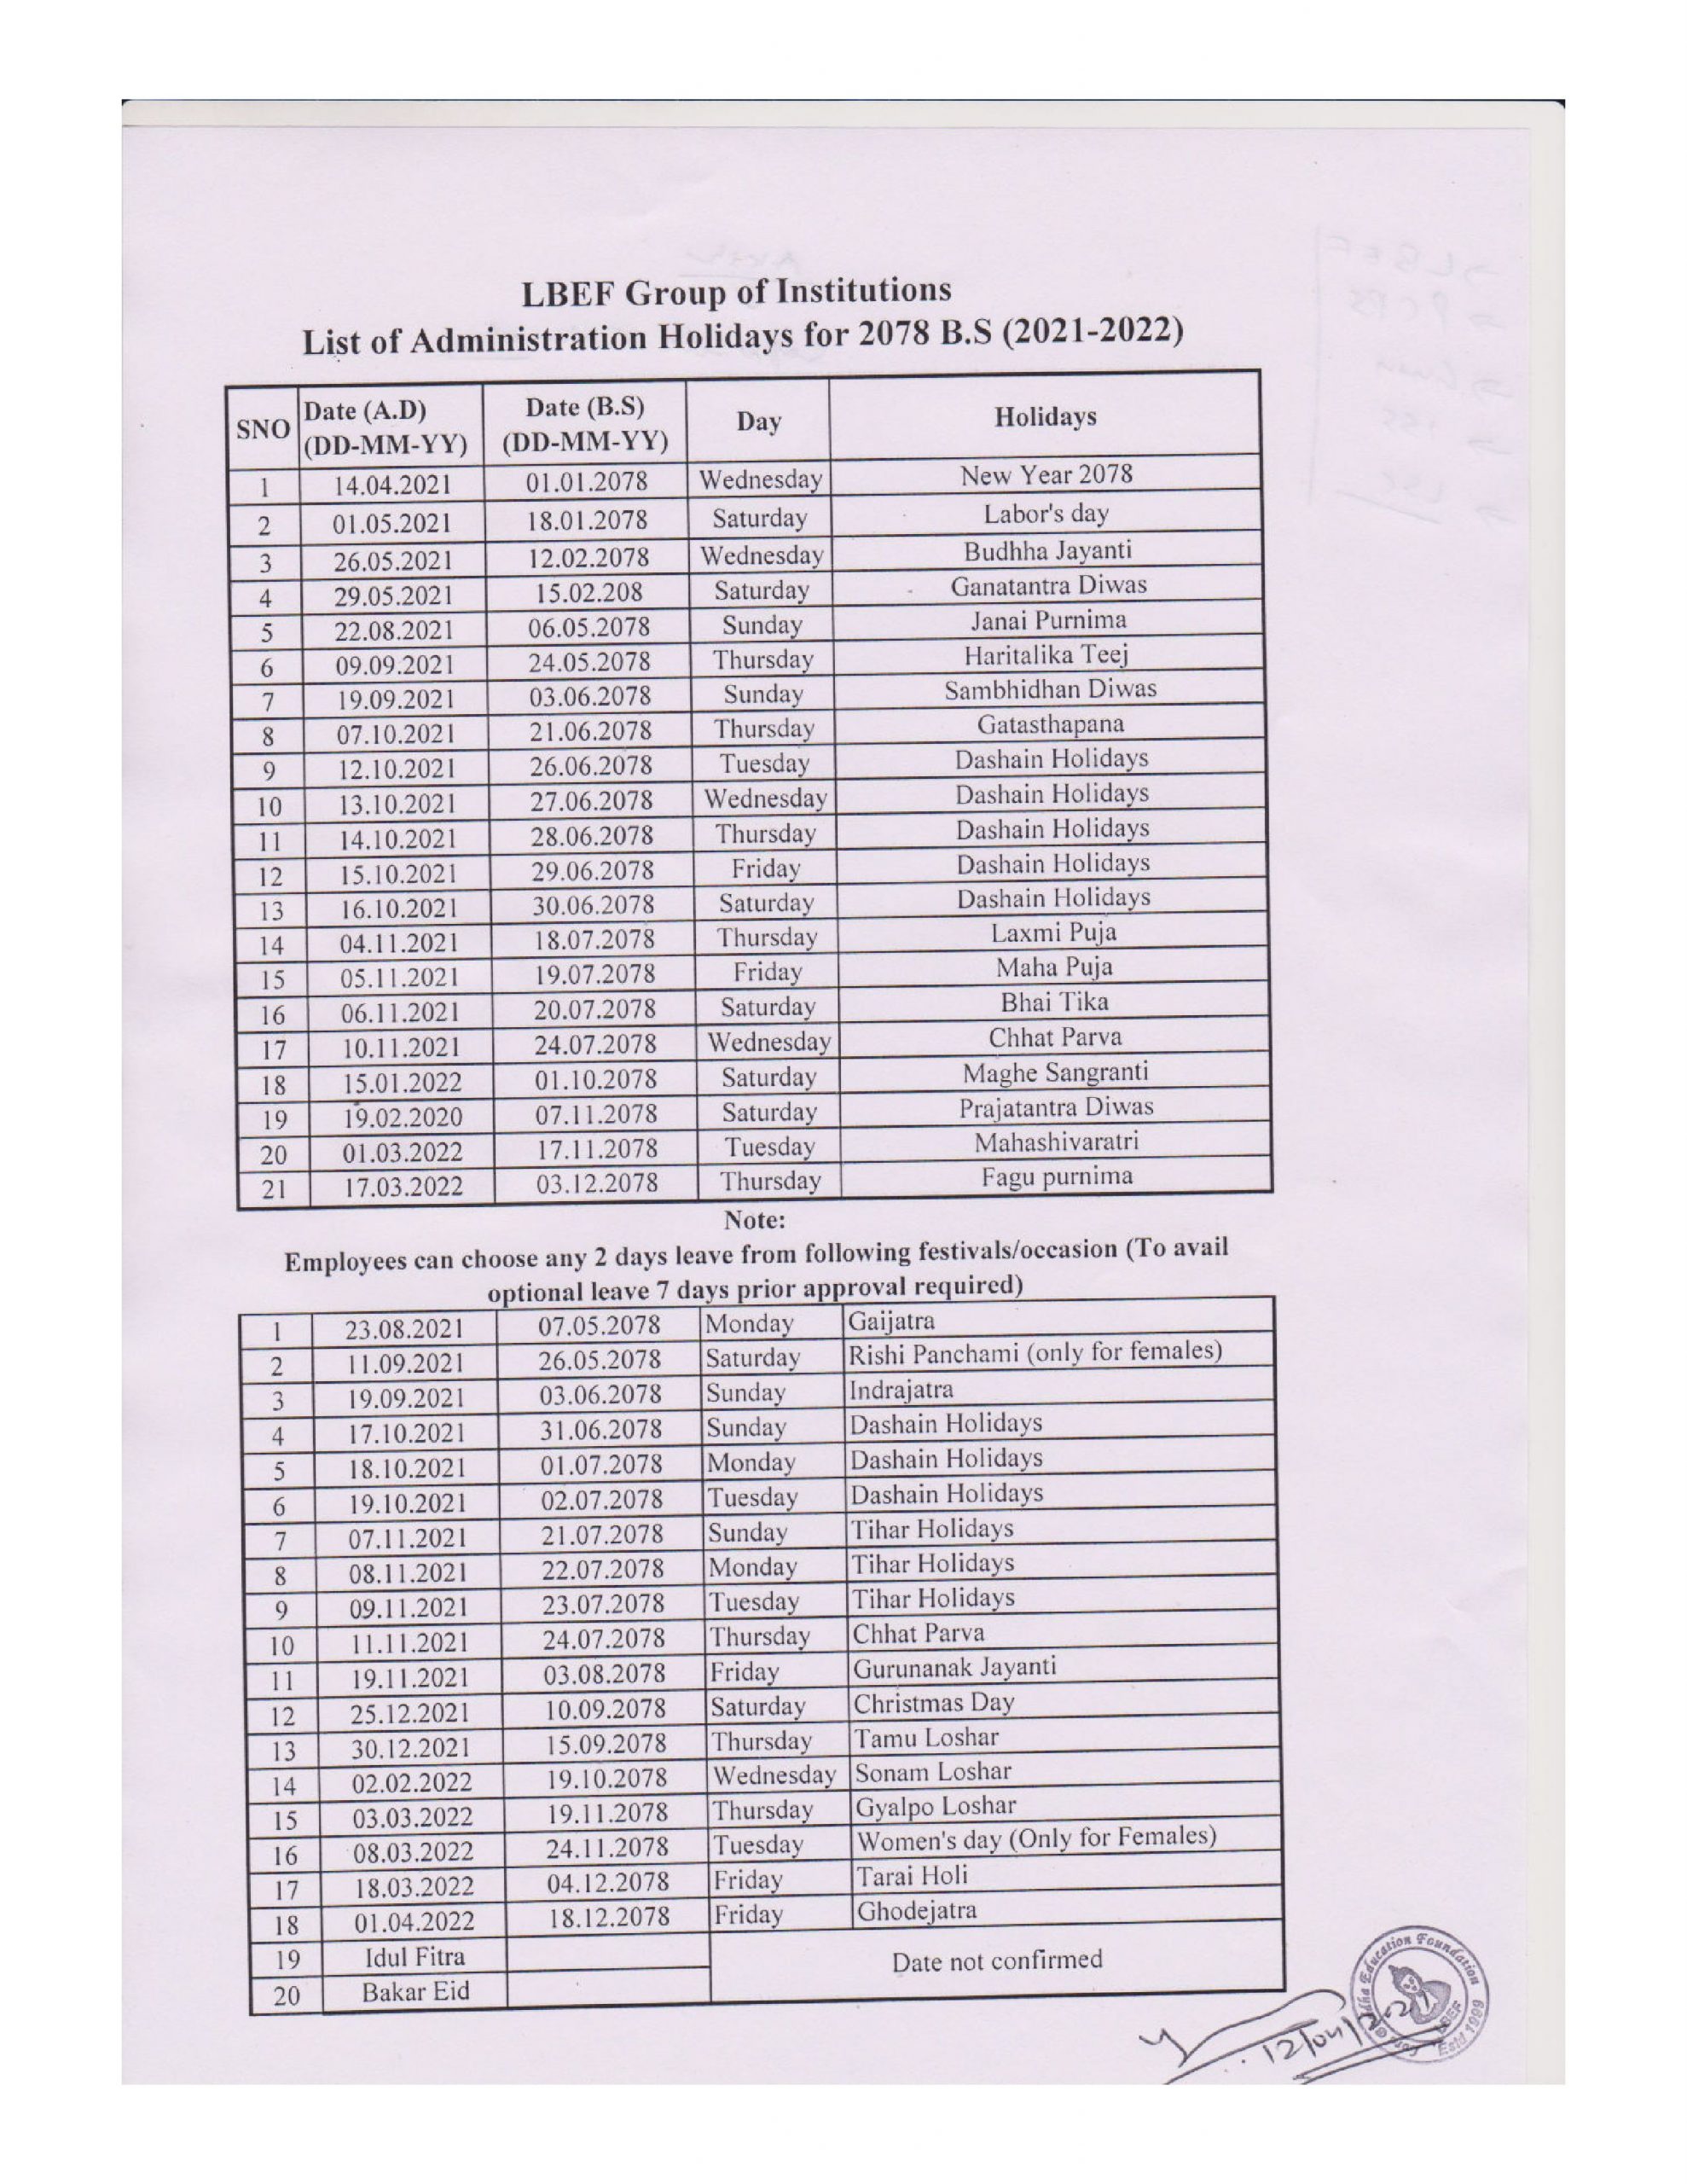 List of Administrative Holidays